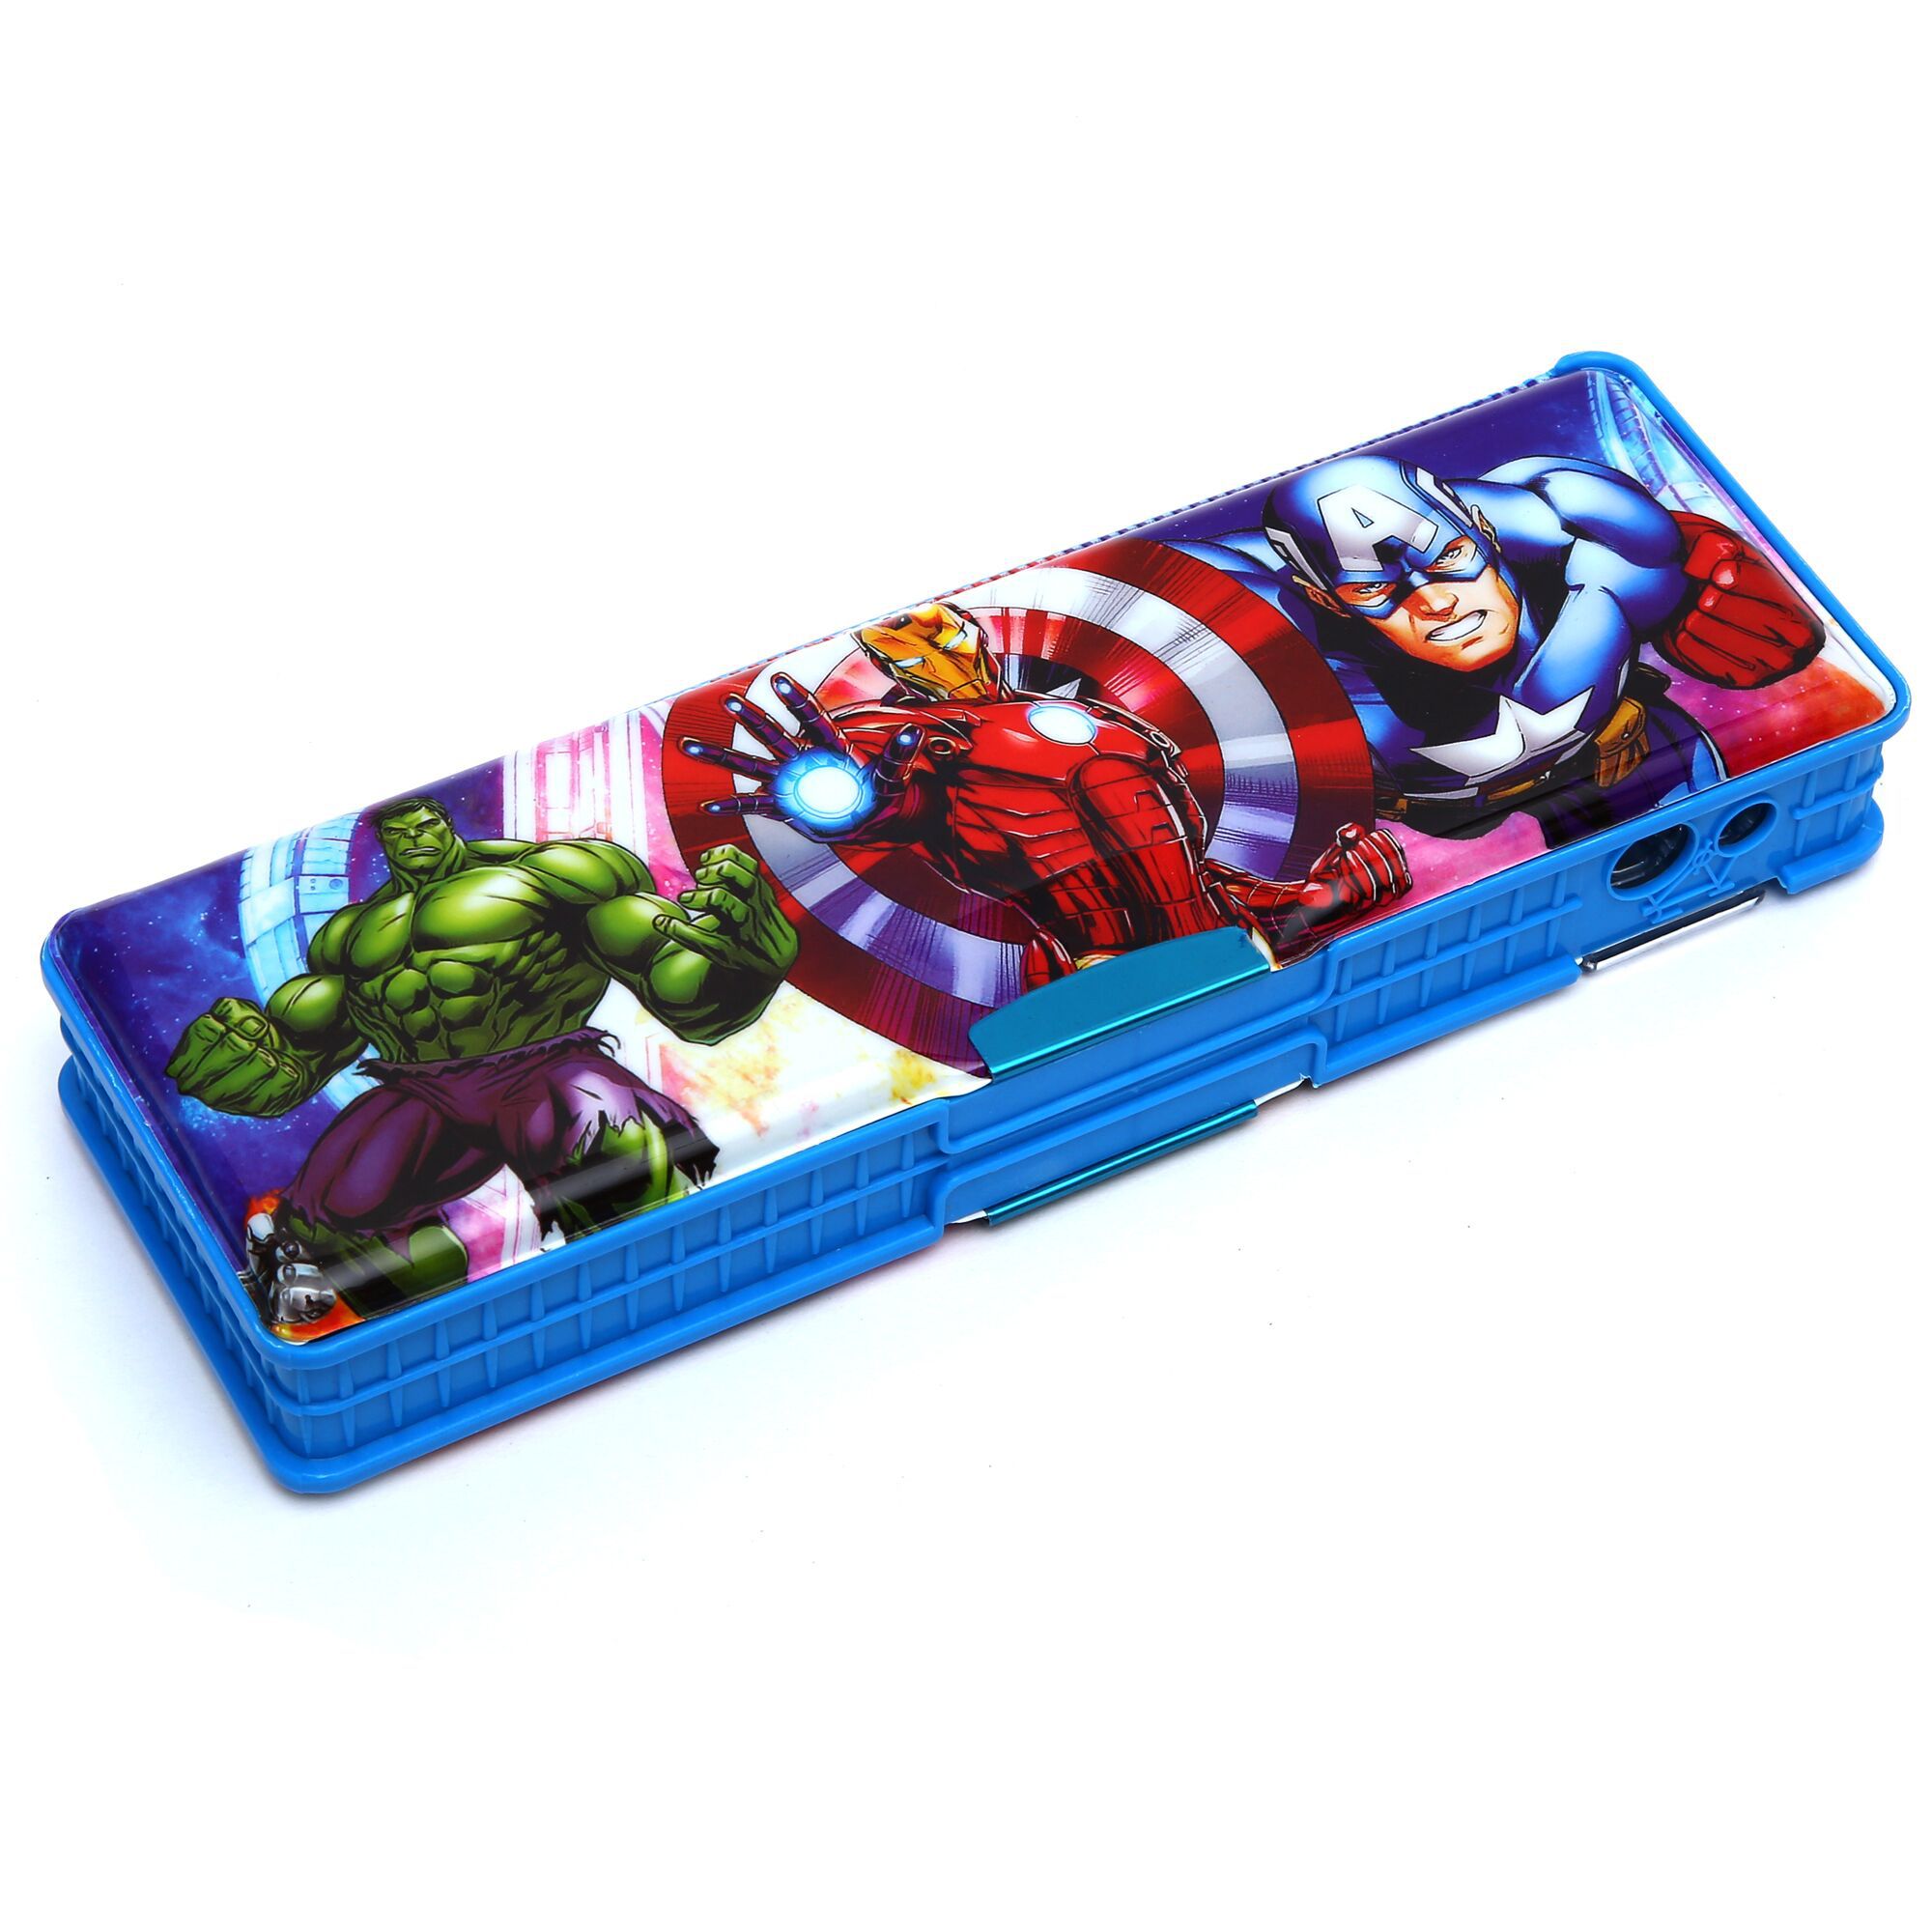     			Wimbley Big Pencil Box With two compartment with sharpener - hulk and avengers characters